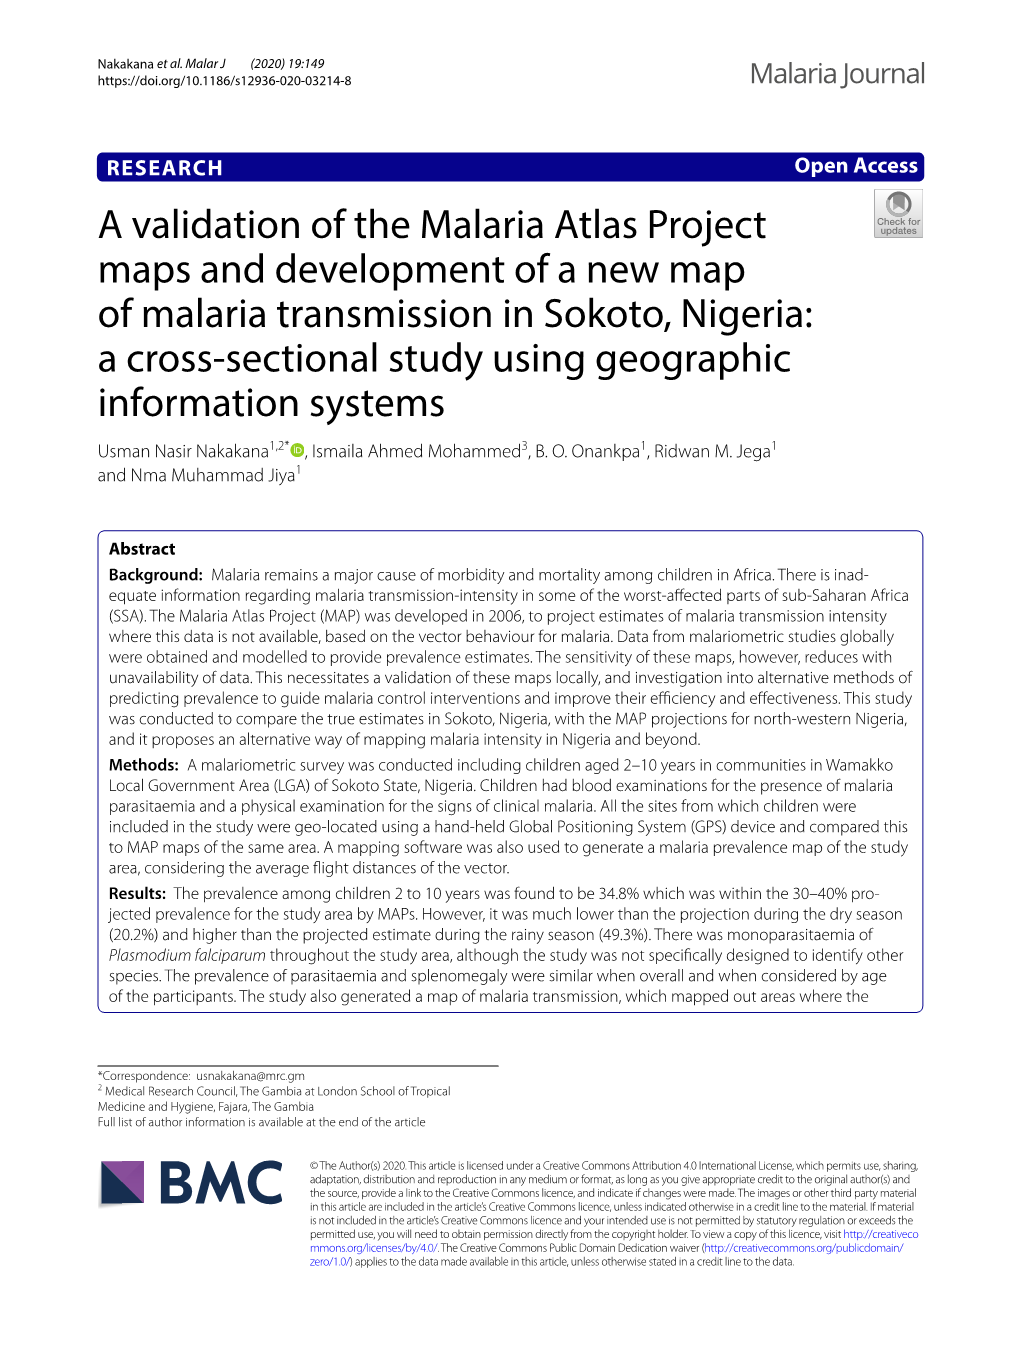 A Validation of the Malaria Atlas Project Maps and Development of a New Map of Malaria Transmission in Sokoto, Nigeria: a Cross